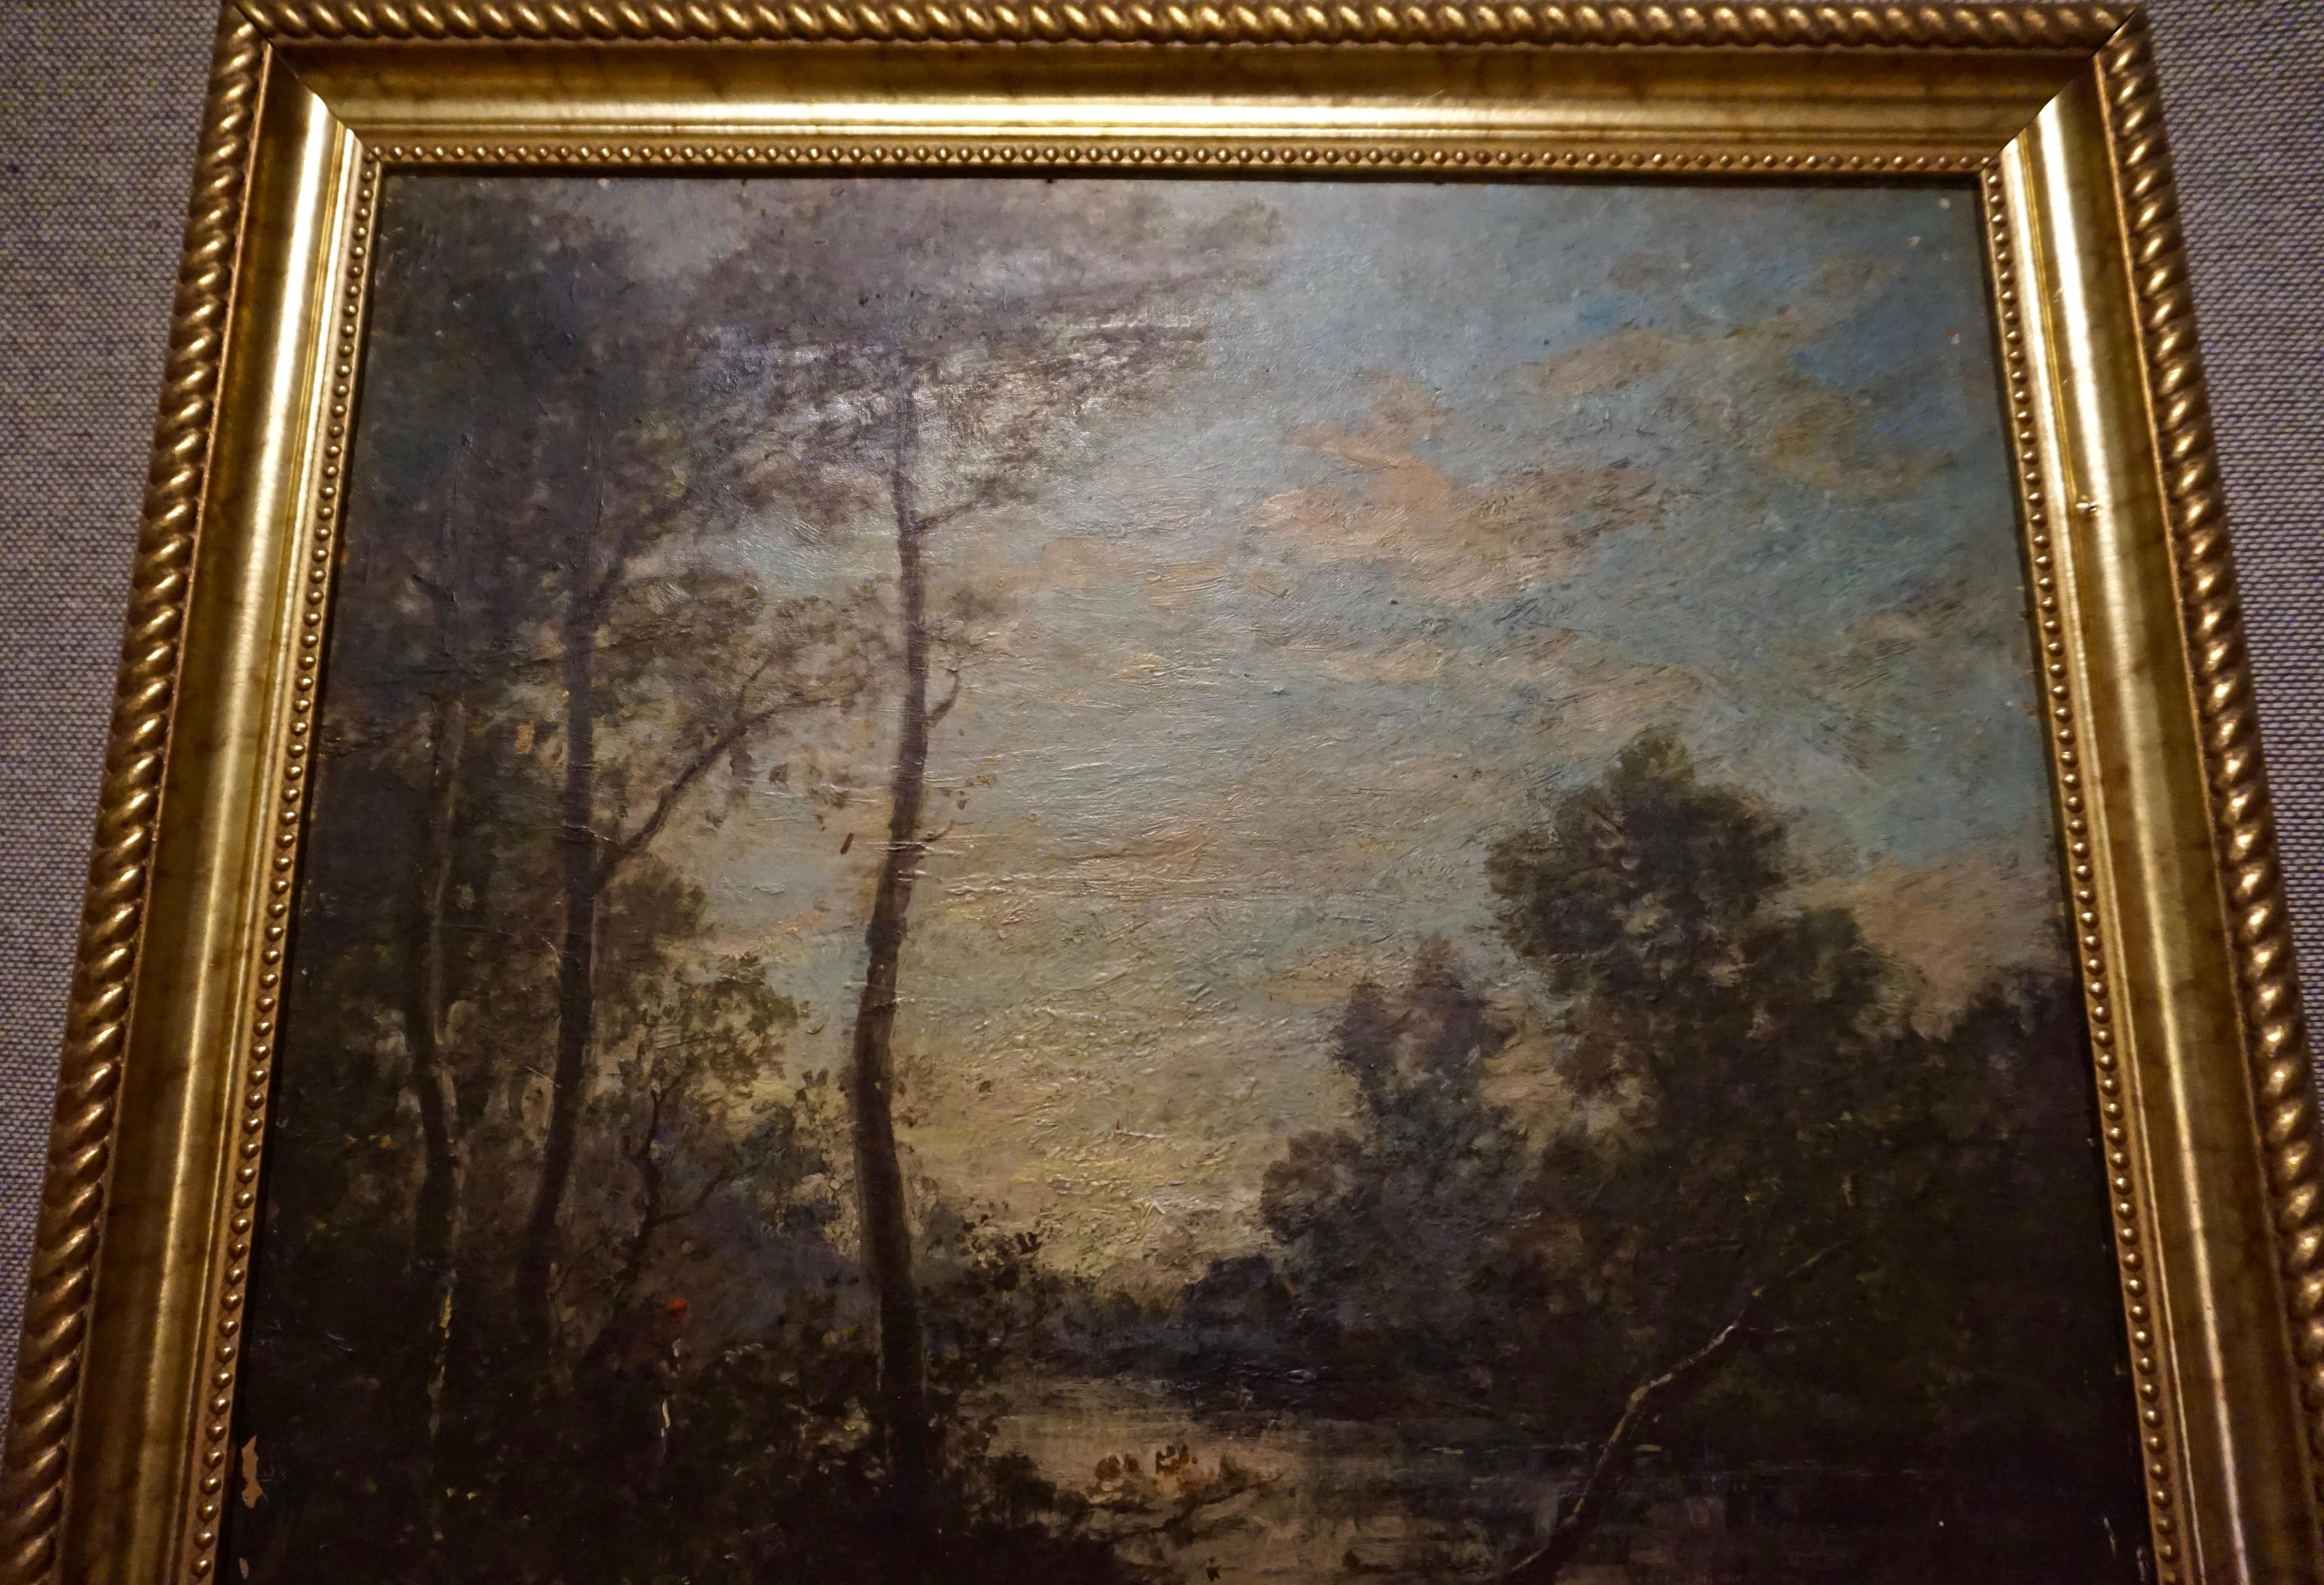 Painted 19th C. French Oil on Canvas Attributed to Jean-Baptise-Camille-Corot School